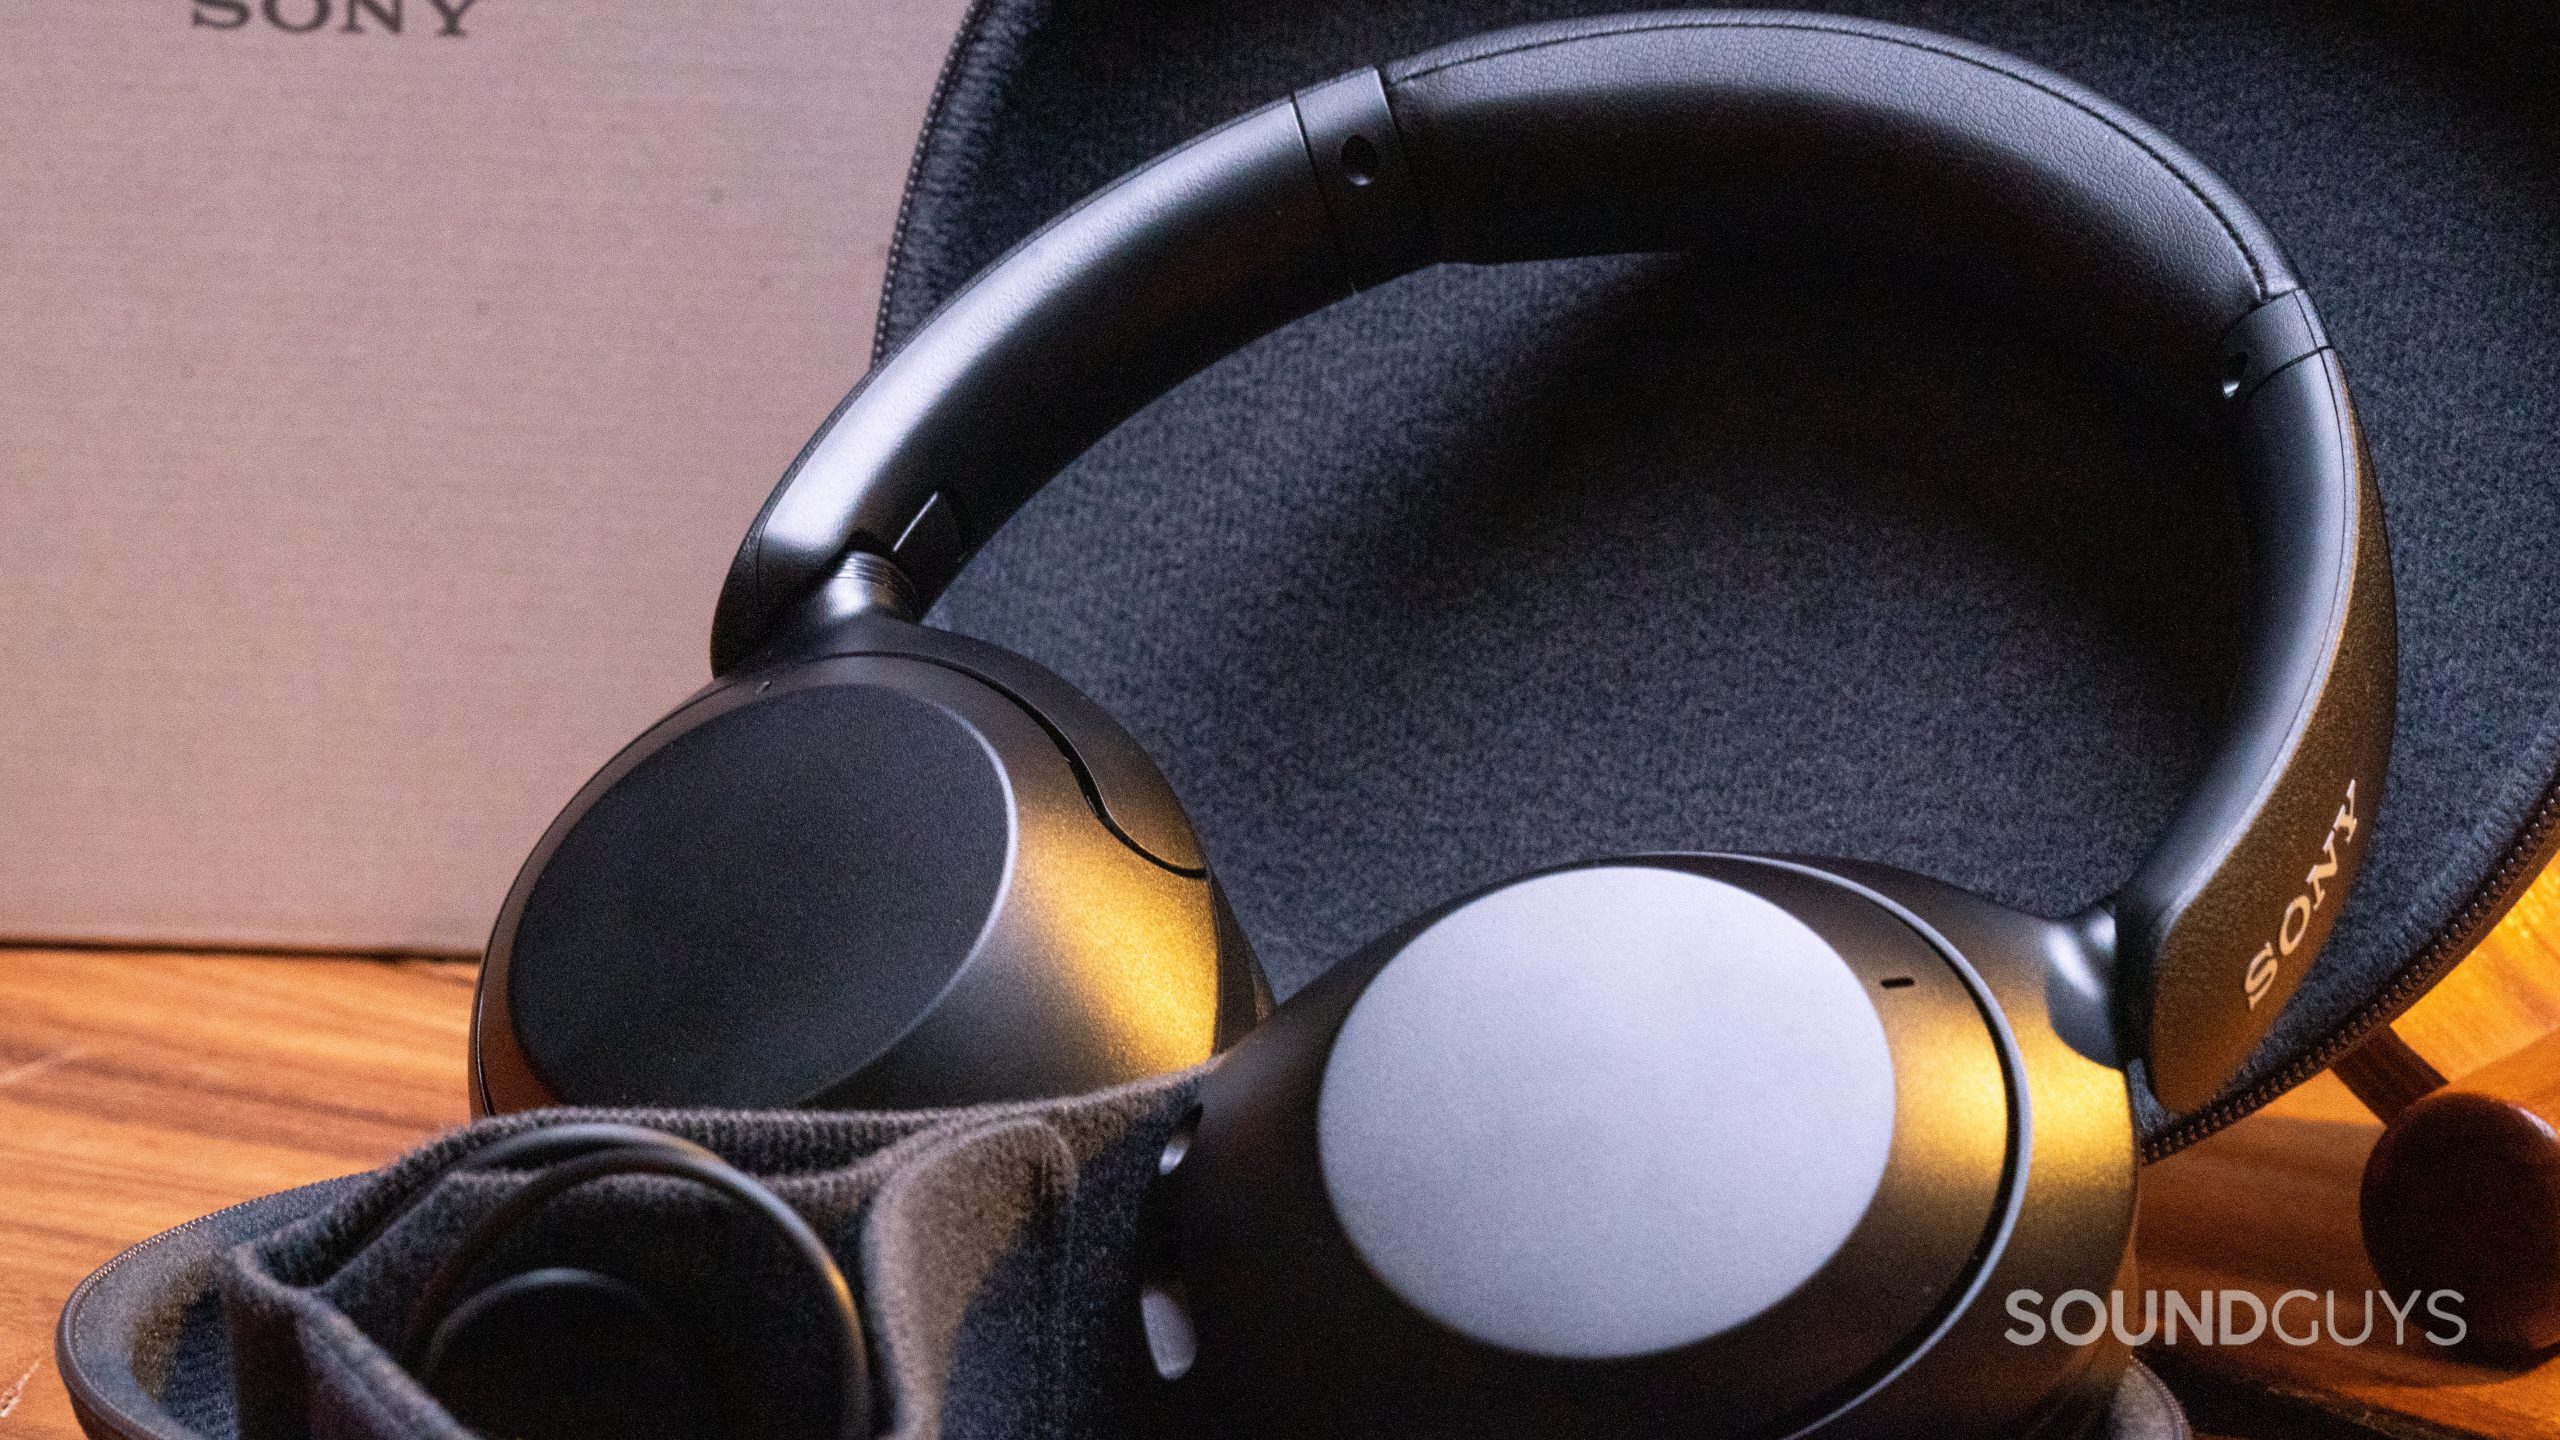 Close up image of the Sony WH-XB910N propped up in its case with the ear cups folded flat.